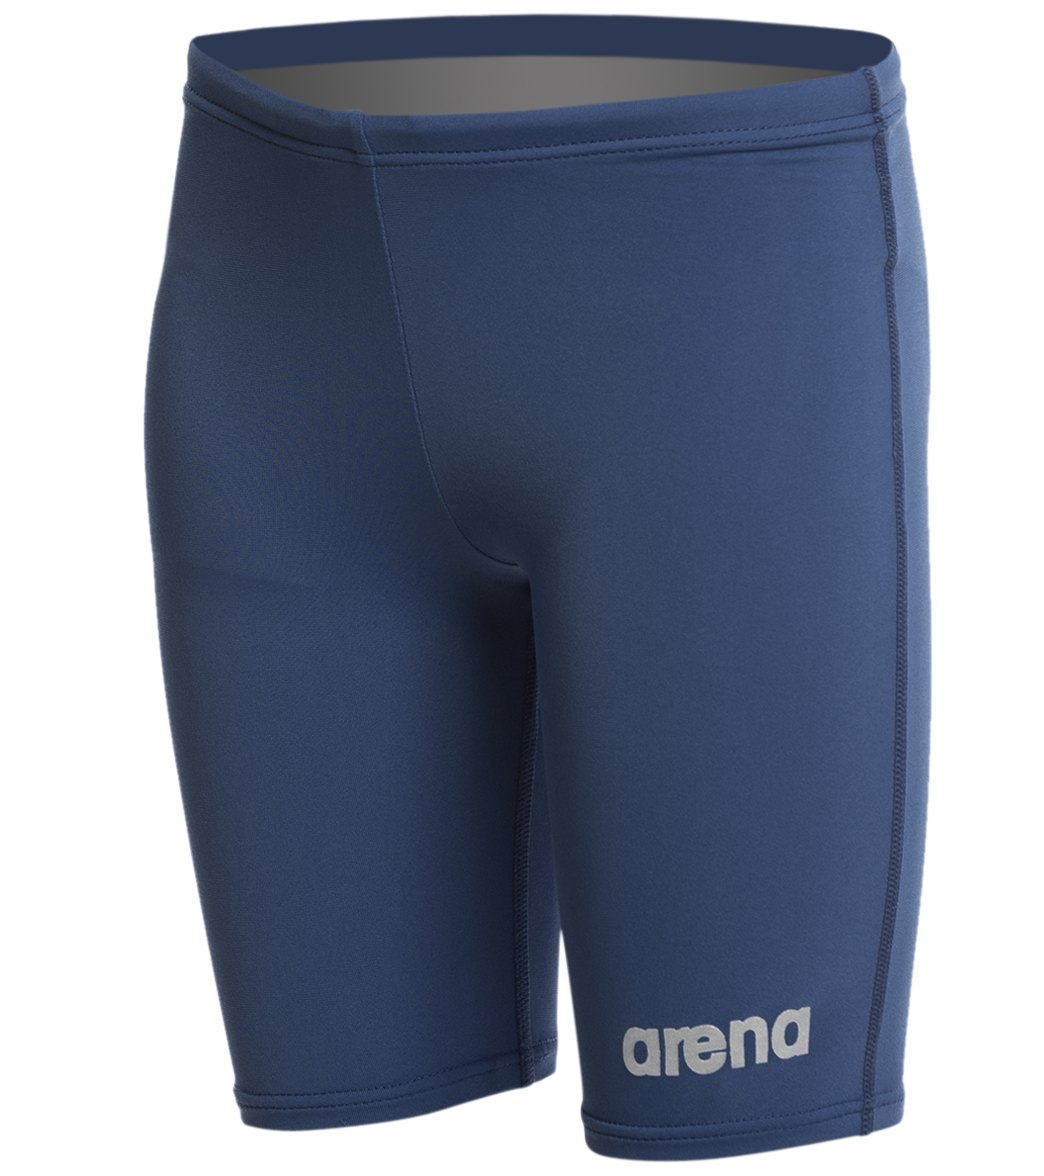 Arena Boys' Board Jammer Swimsuit at SwimOutlet.com